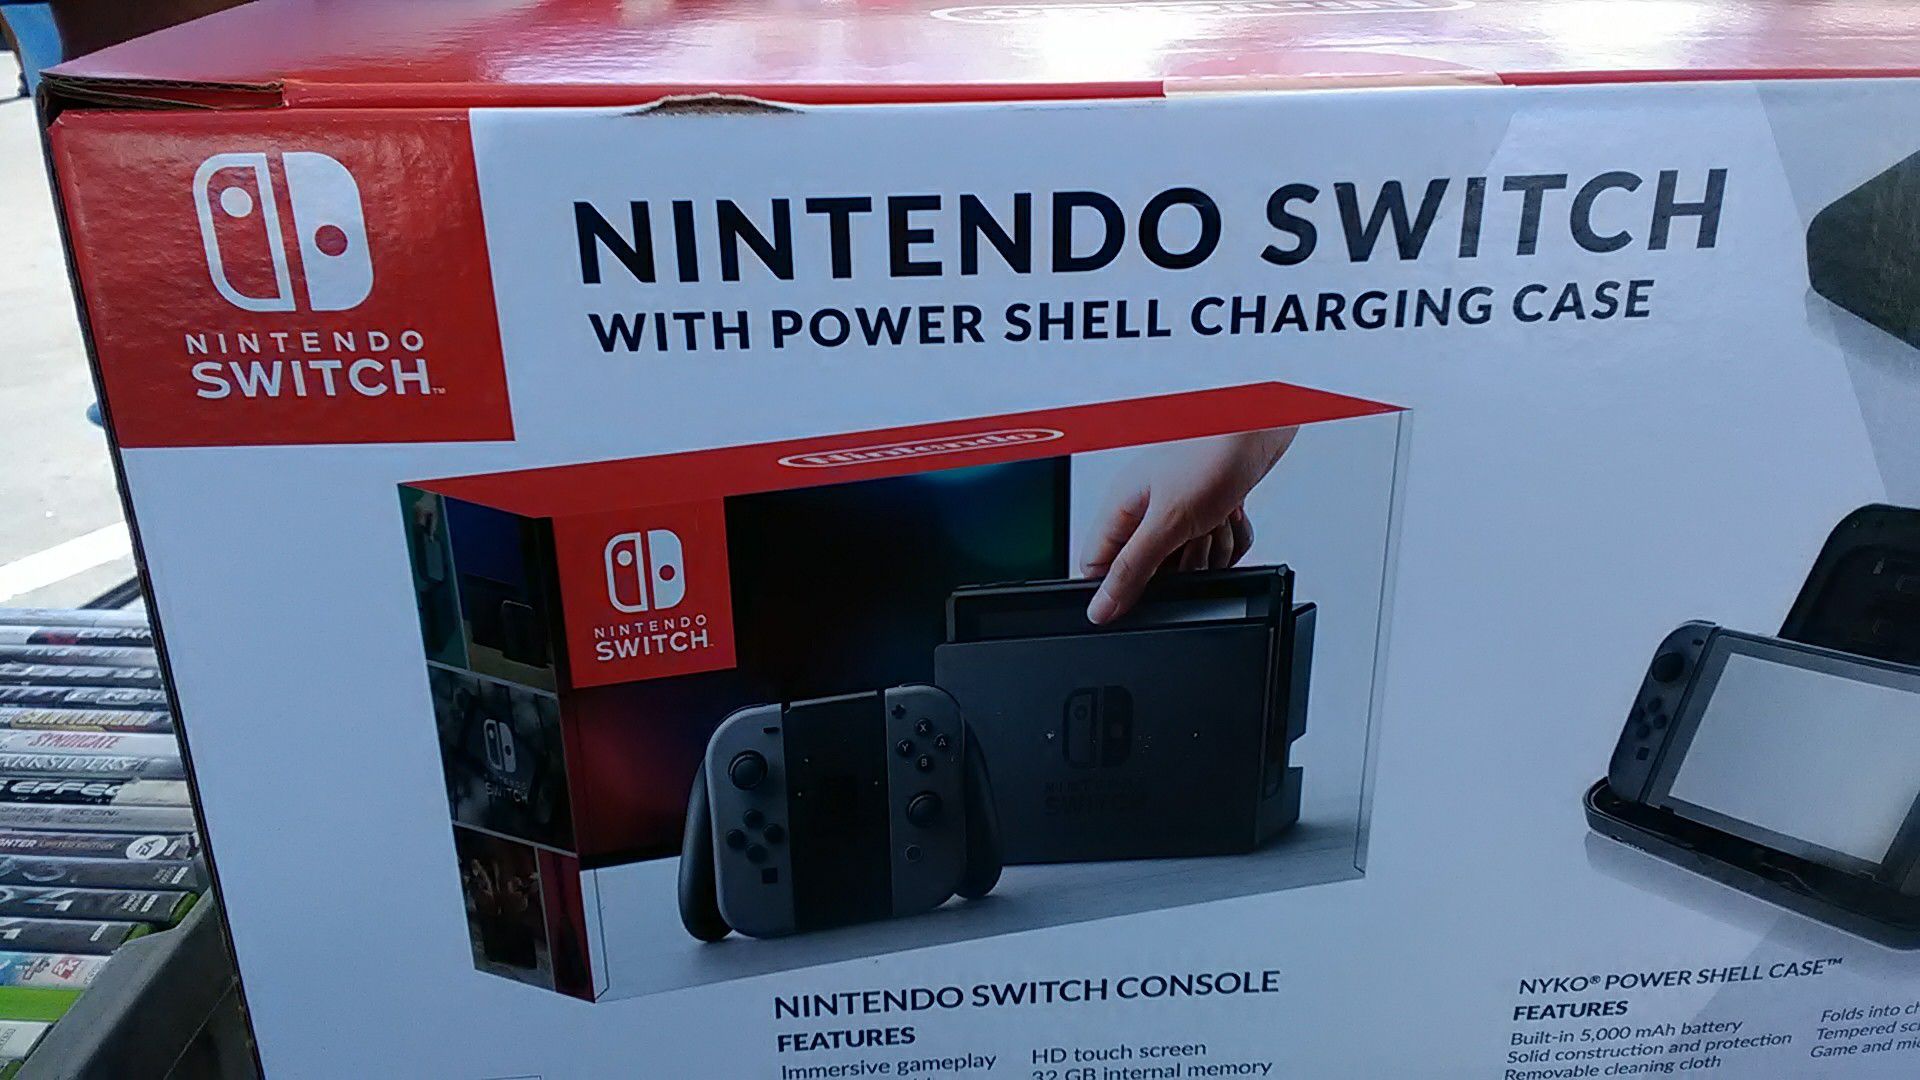 Nintendo switch with power shell charging case